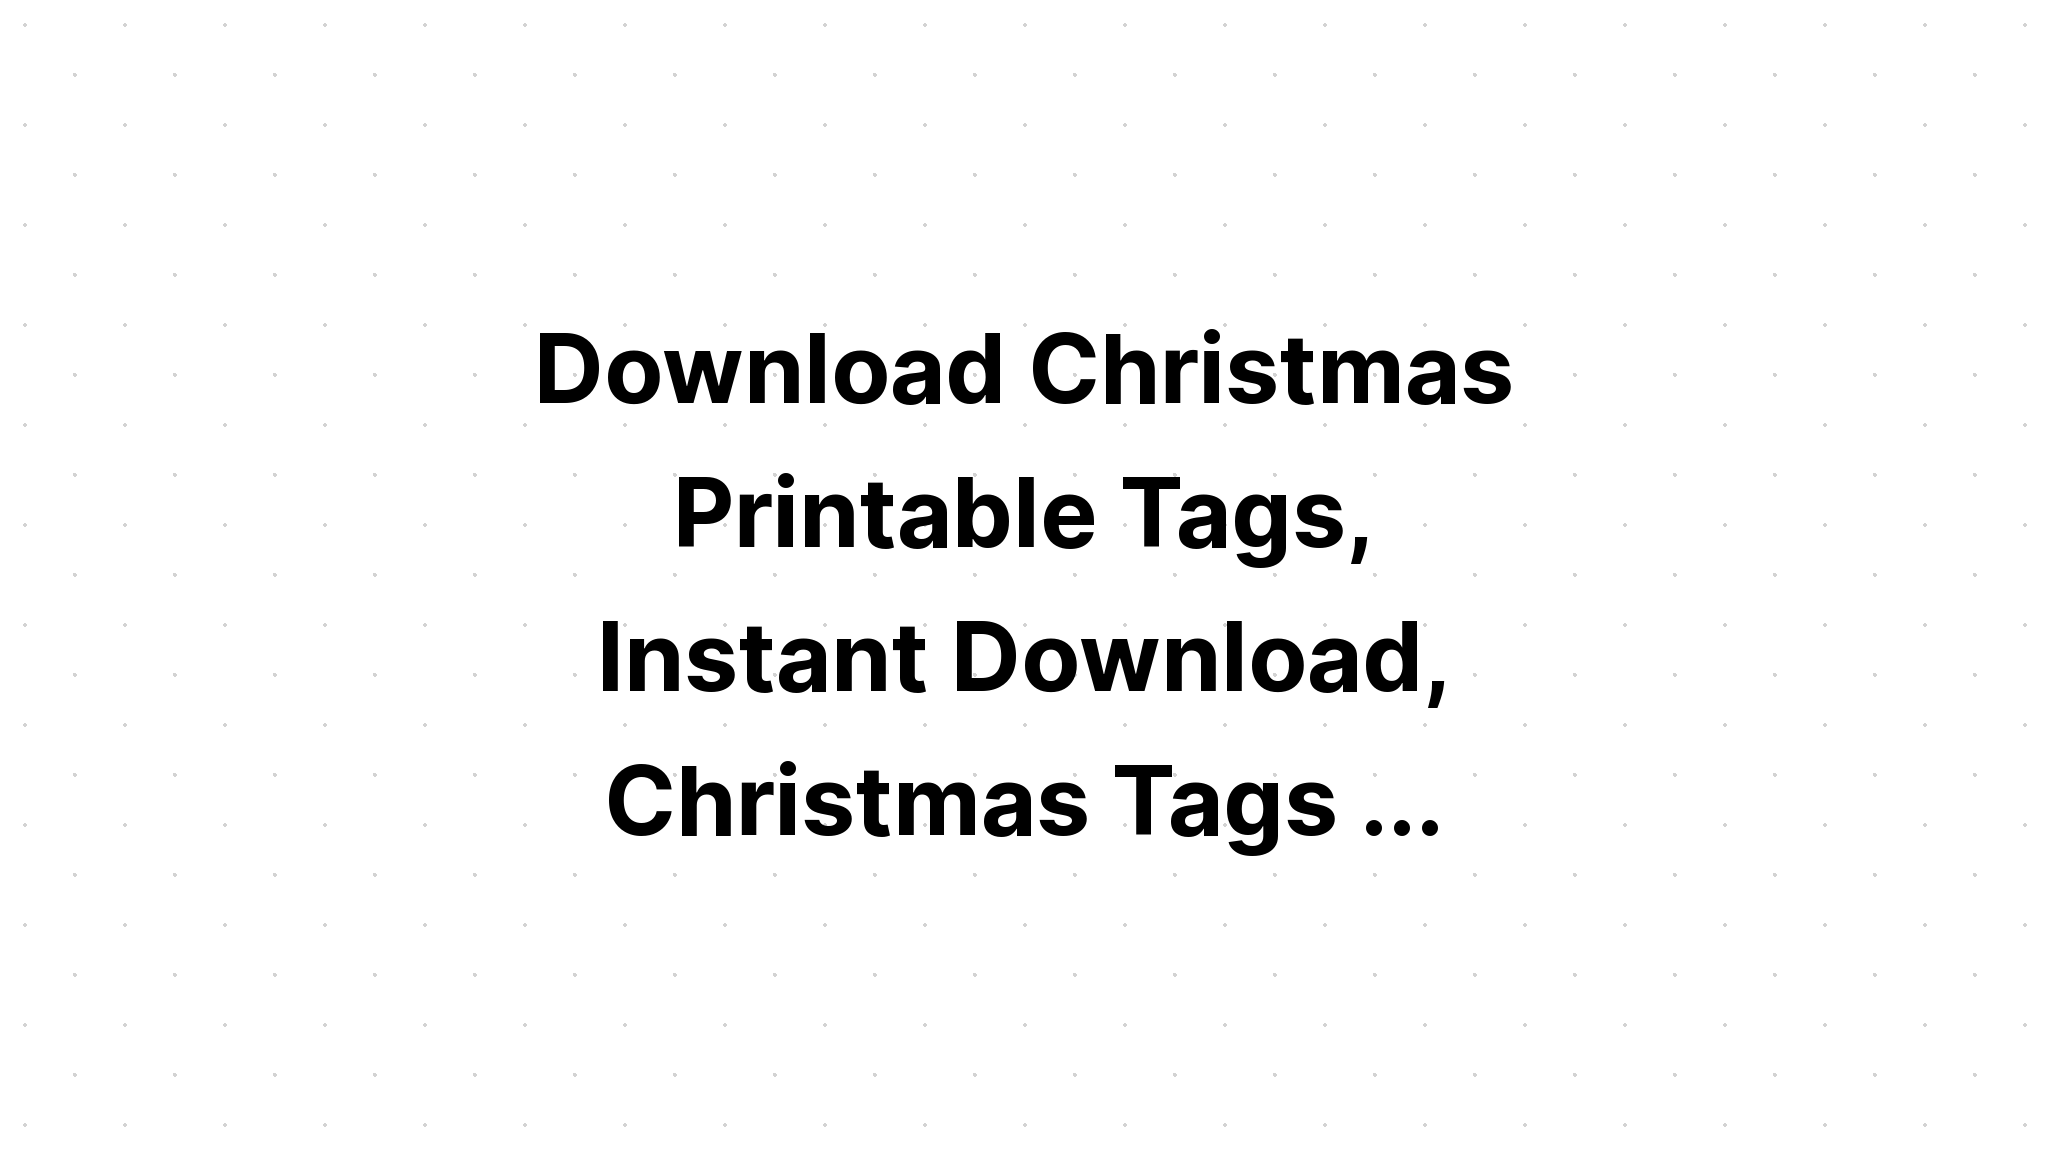 Download Santa Was Here Merry Christmas Print Cut SVG File